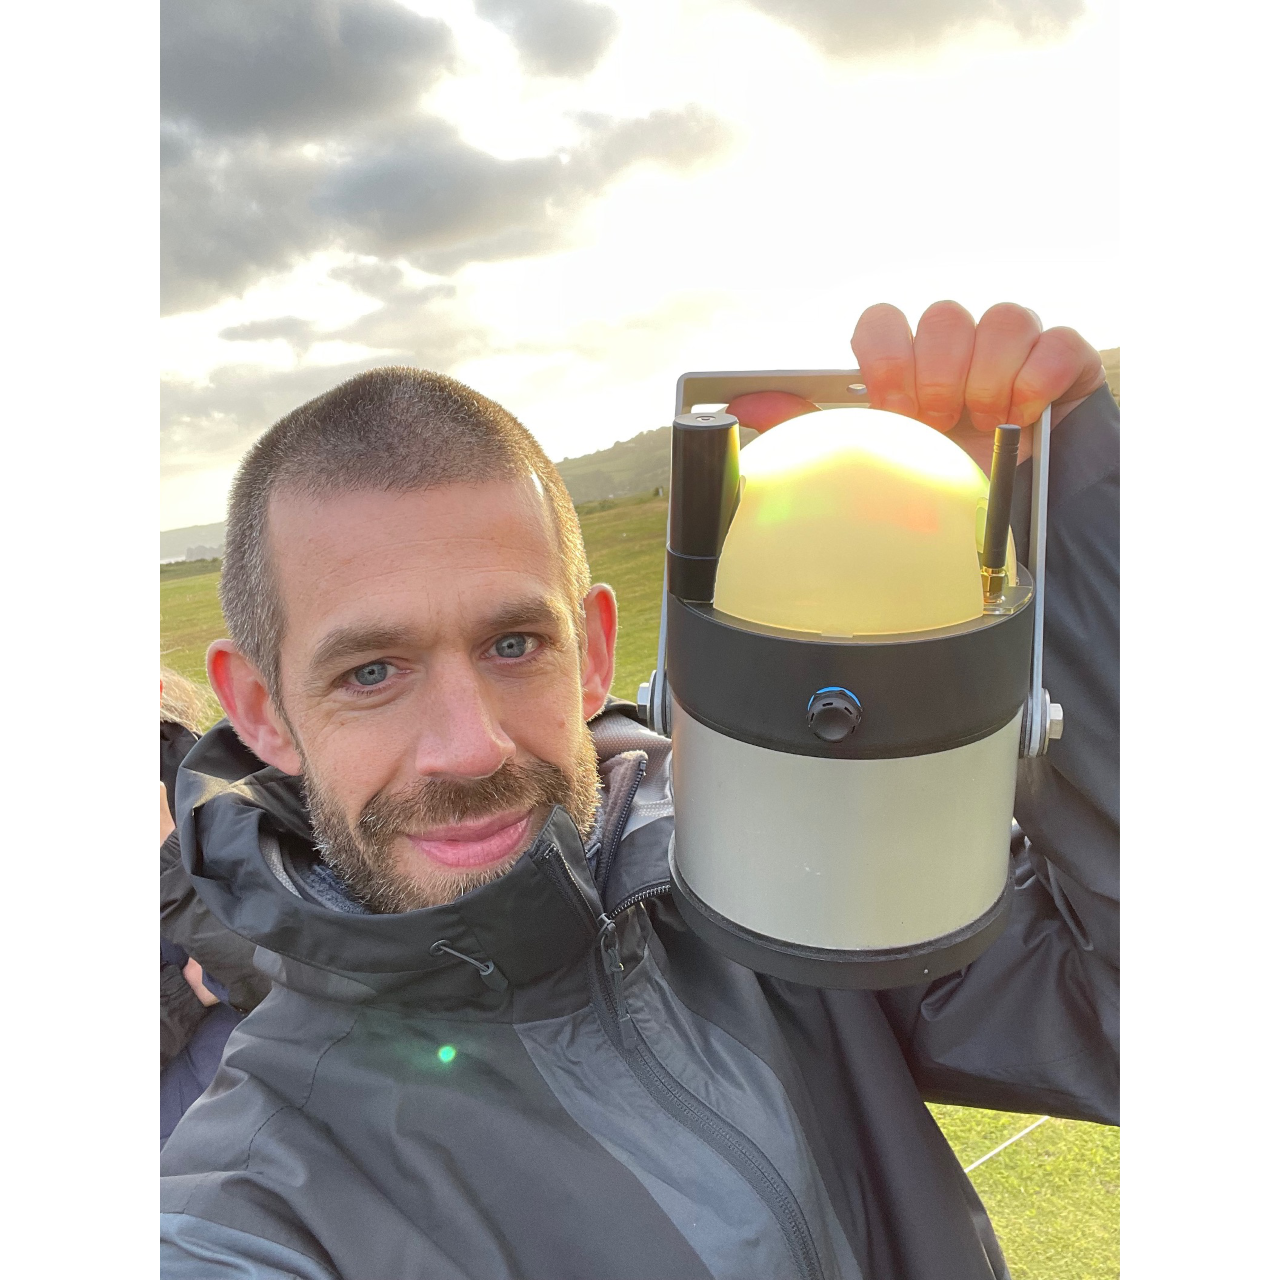 Direct Access Consultant Jamie standing in a field holds up an electronic lantern and smiles for a selfie